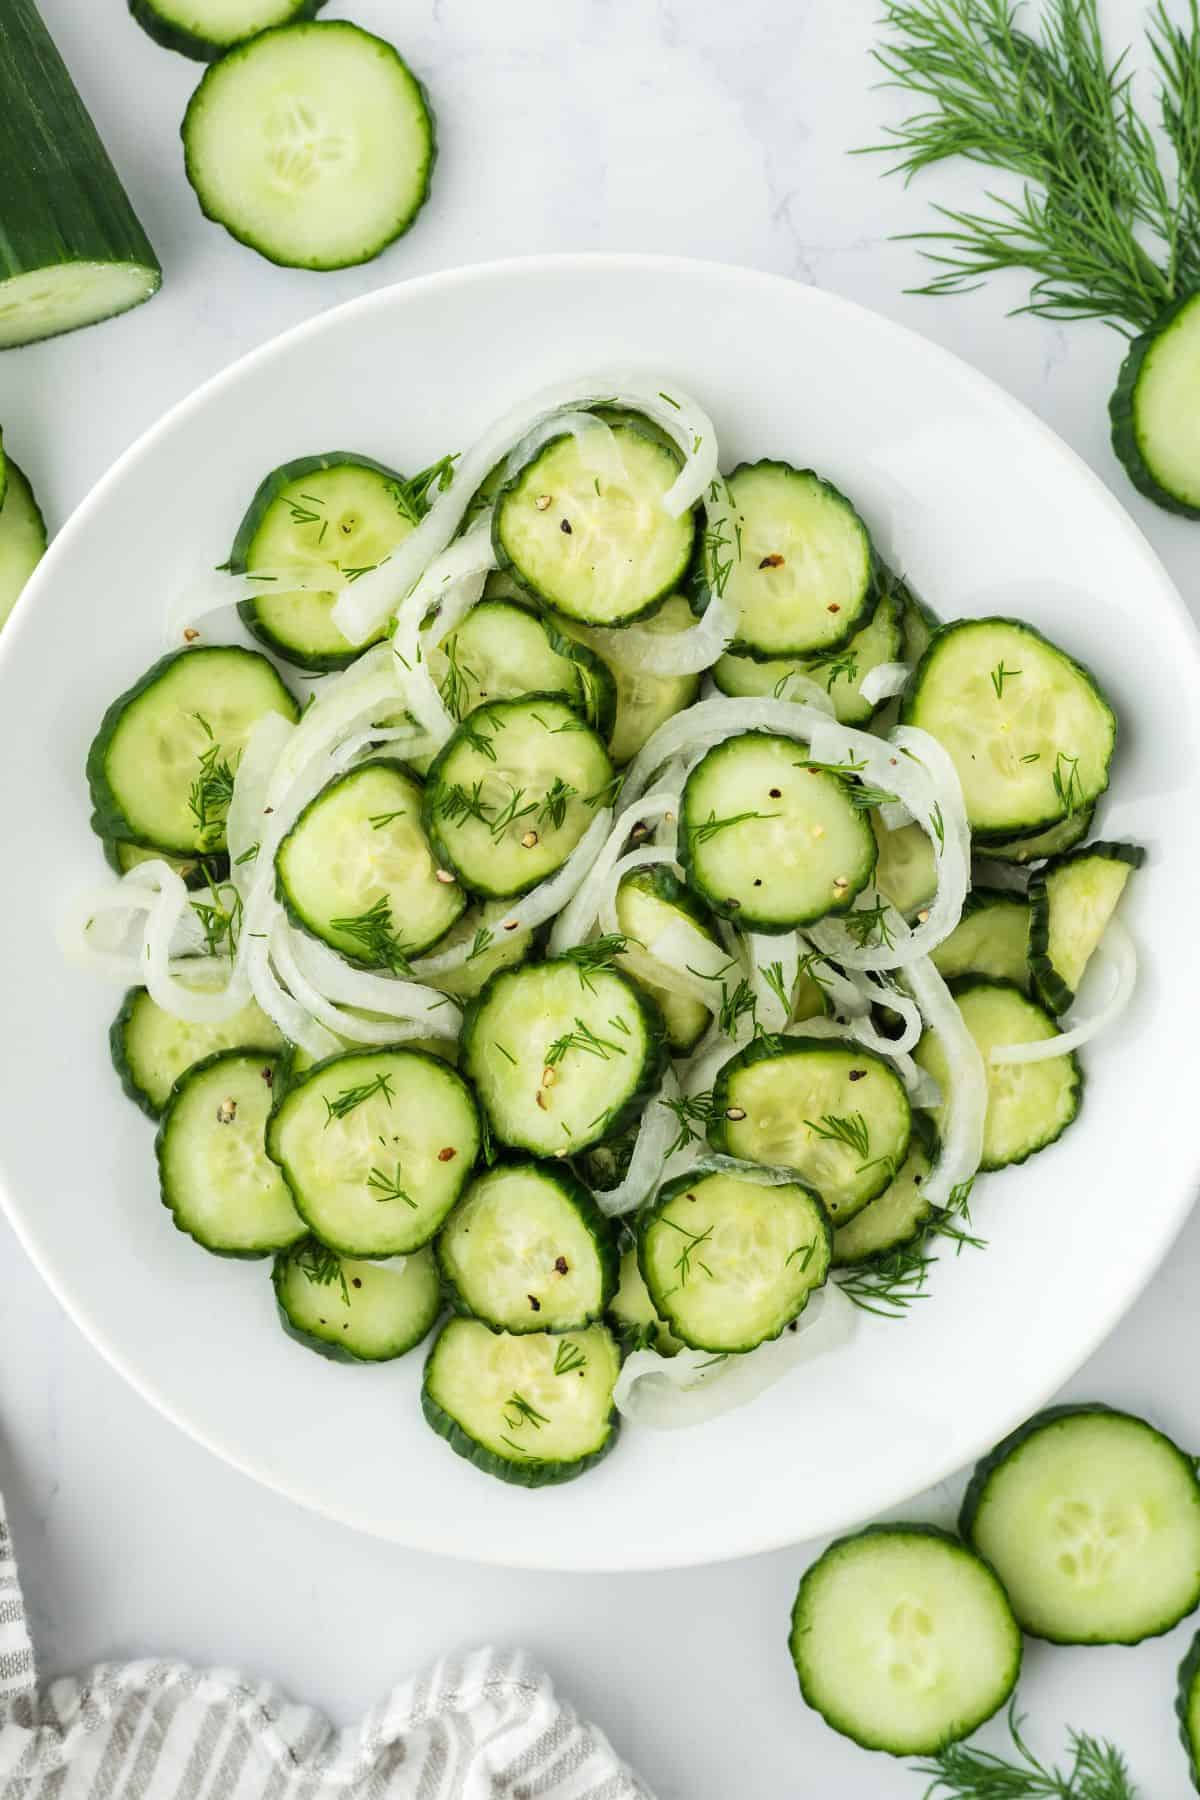 Overhead shot of cucumber and onion salad garnished with dill, arranged in a white plate. Next to it there are more cucumber slices and sprigs of dill